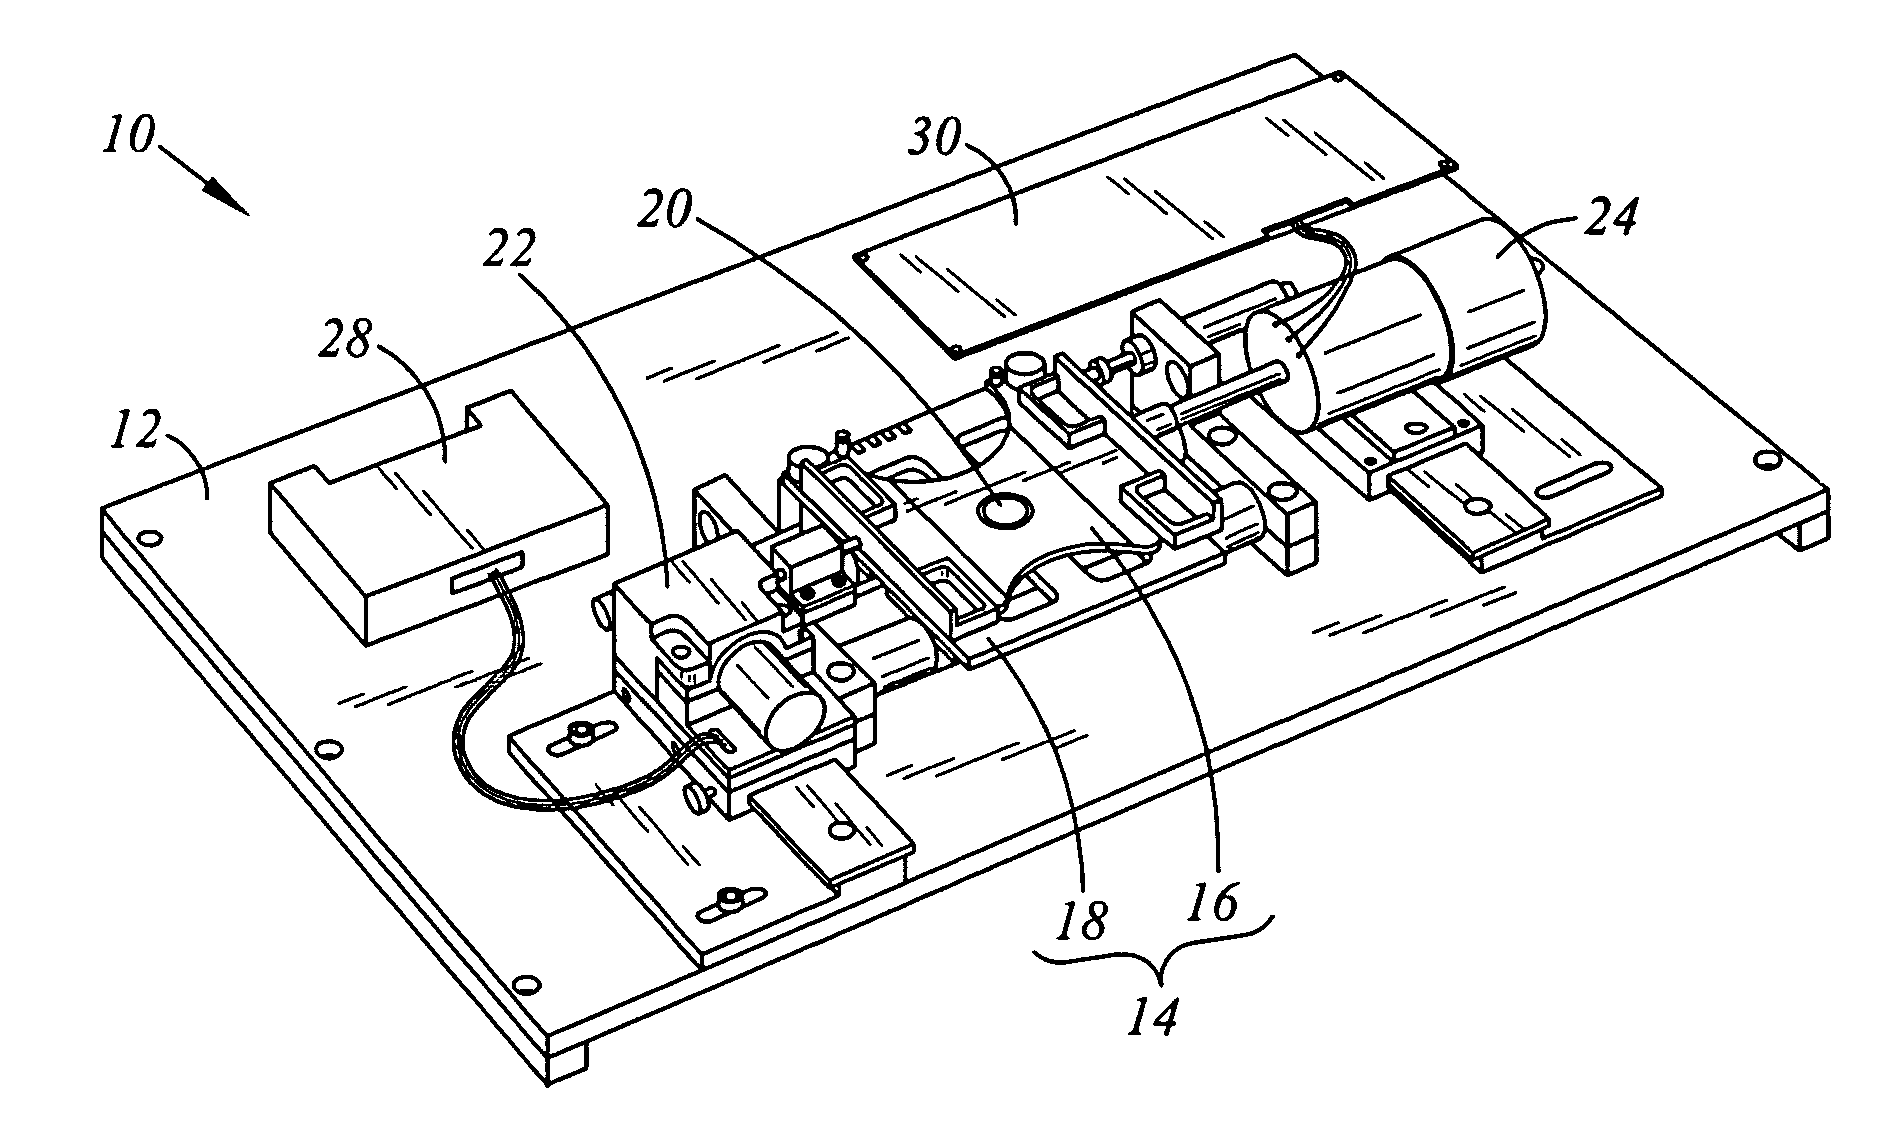 Data storage testing apparatus for delivering linear or rotational acceleration